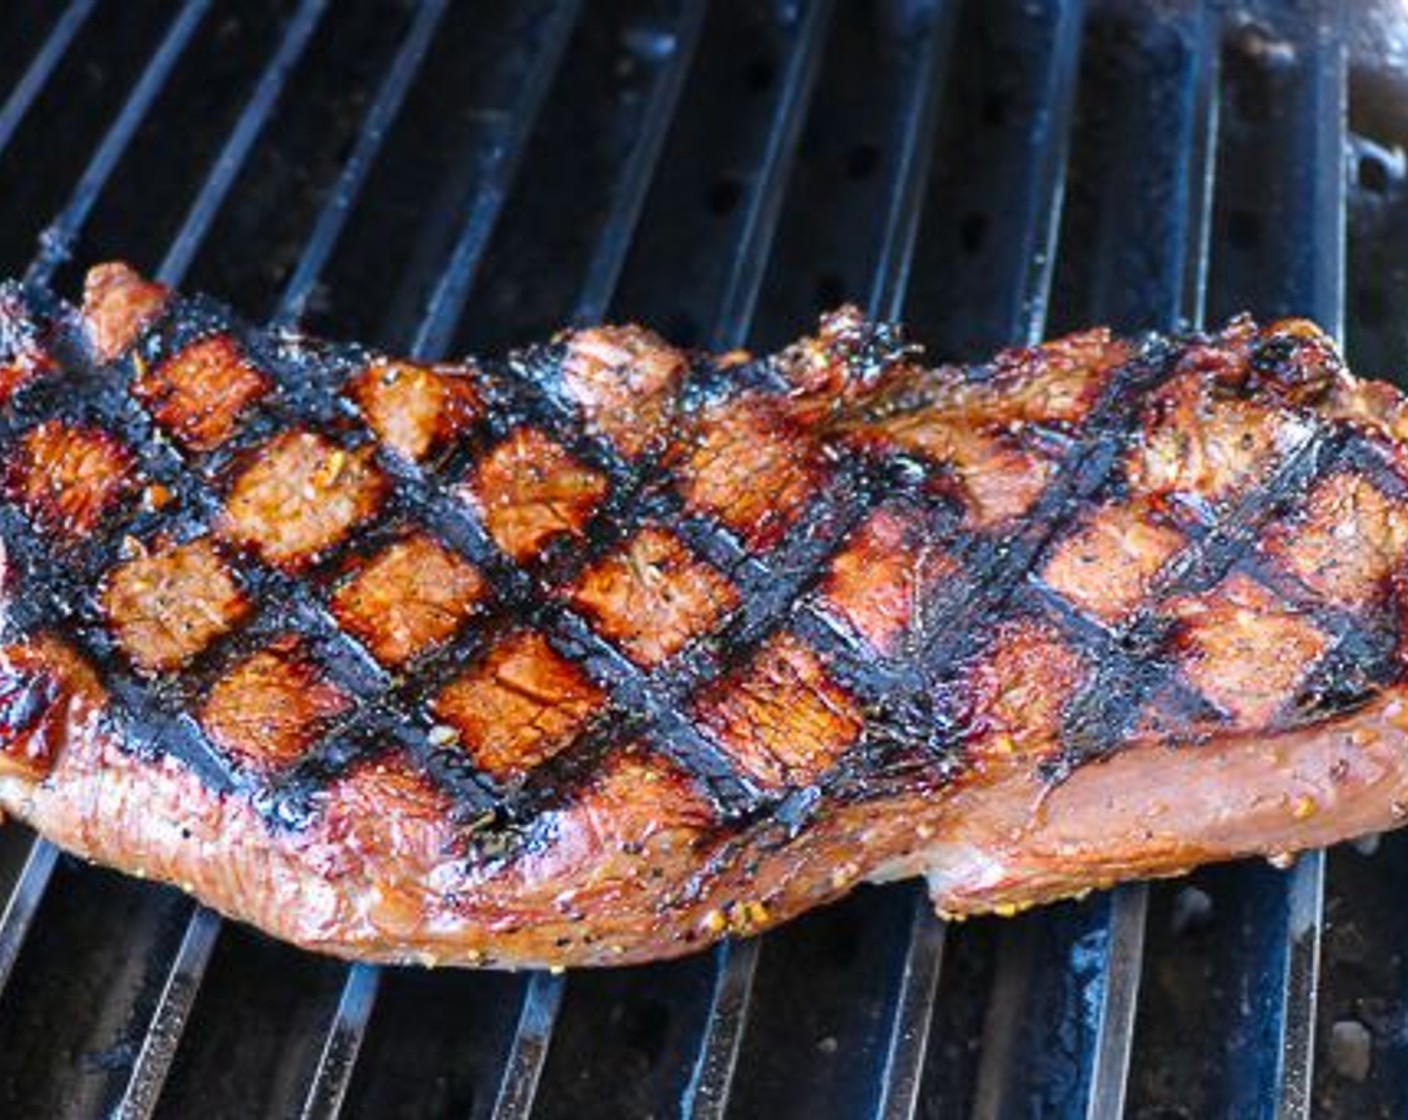 step 6 Lightly oil cooking grate and place steak on grill. Cook for 6 minutes (twist steak half way for grill marks)